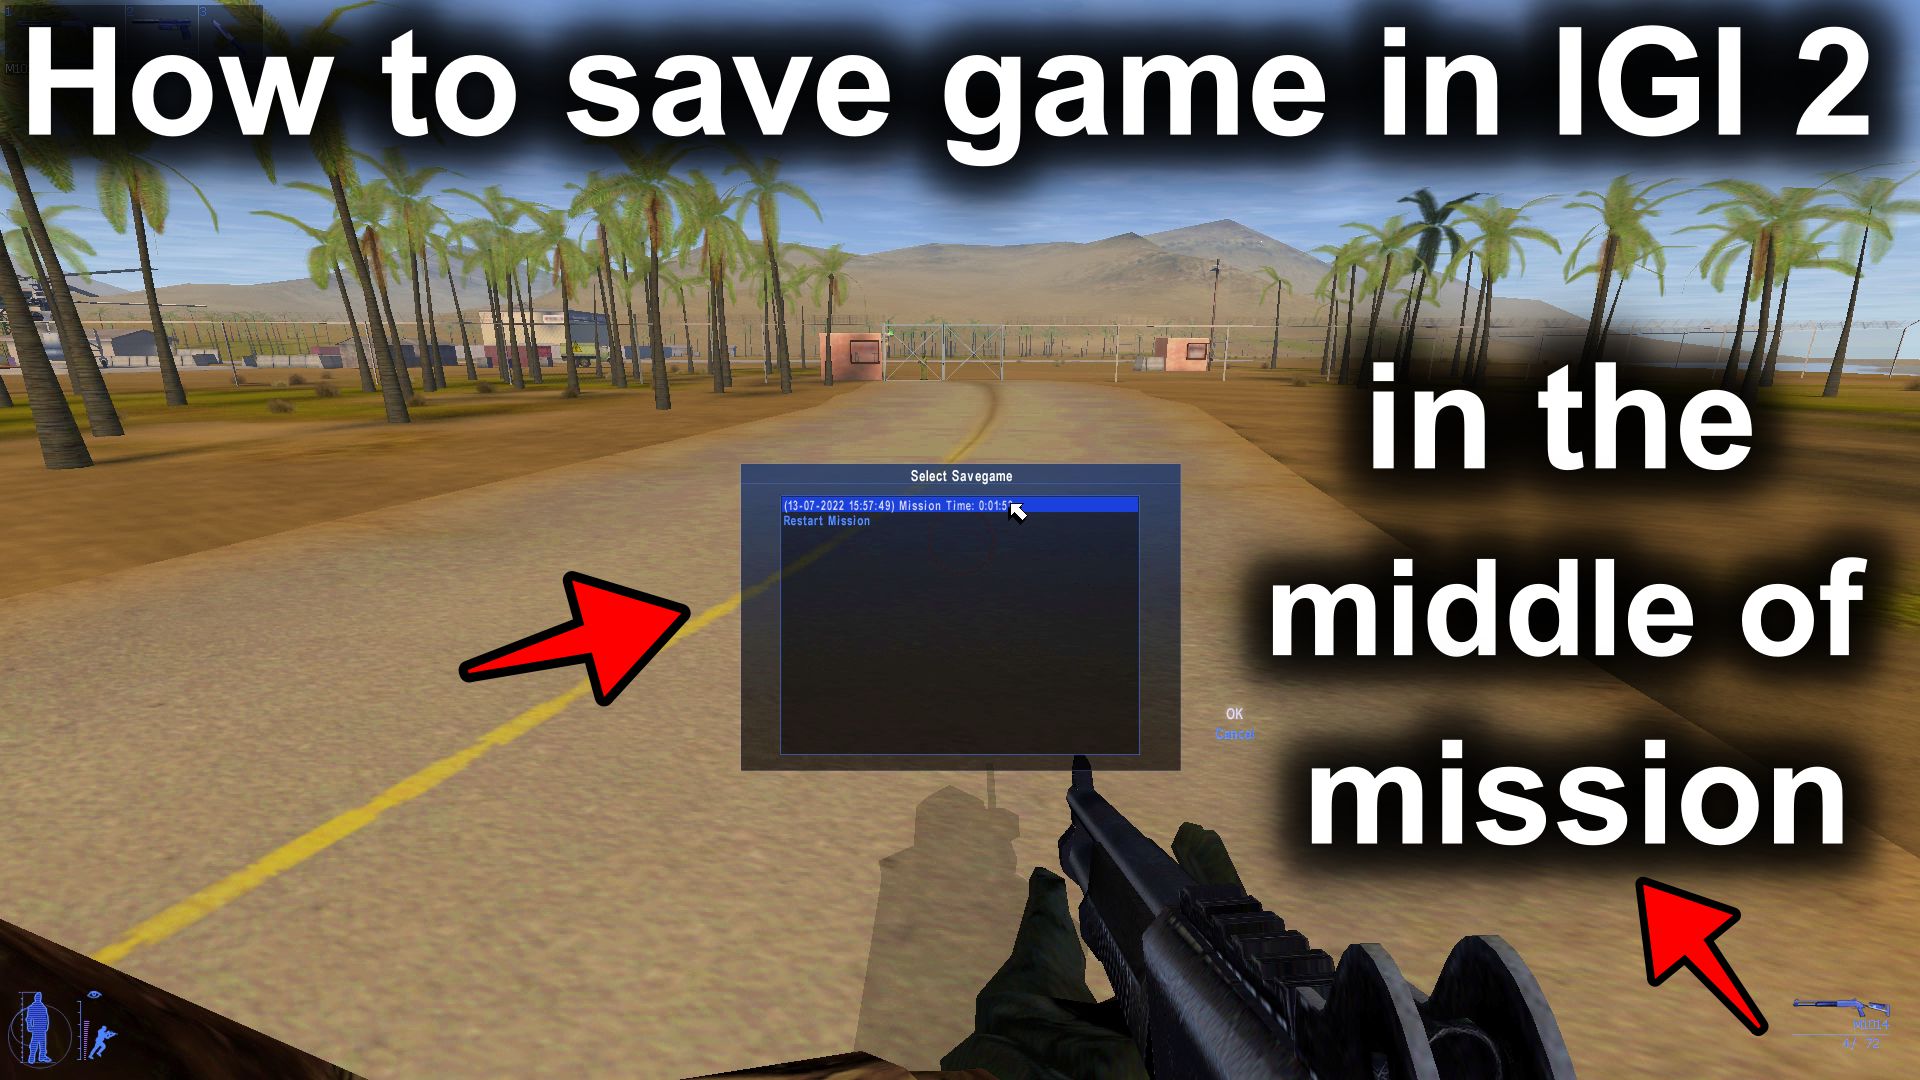 how to save game in IGI 2 in the middle of the game mission